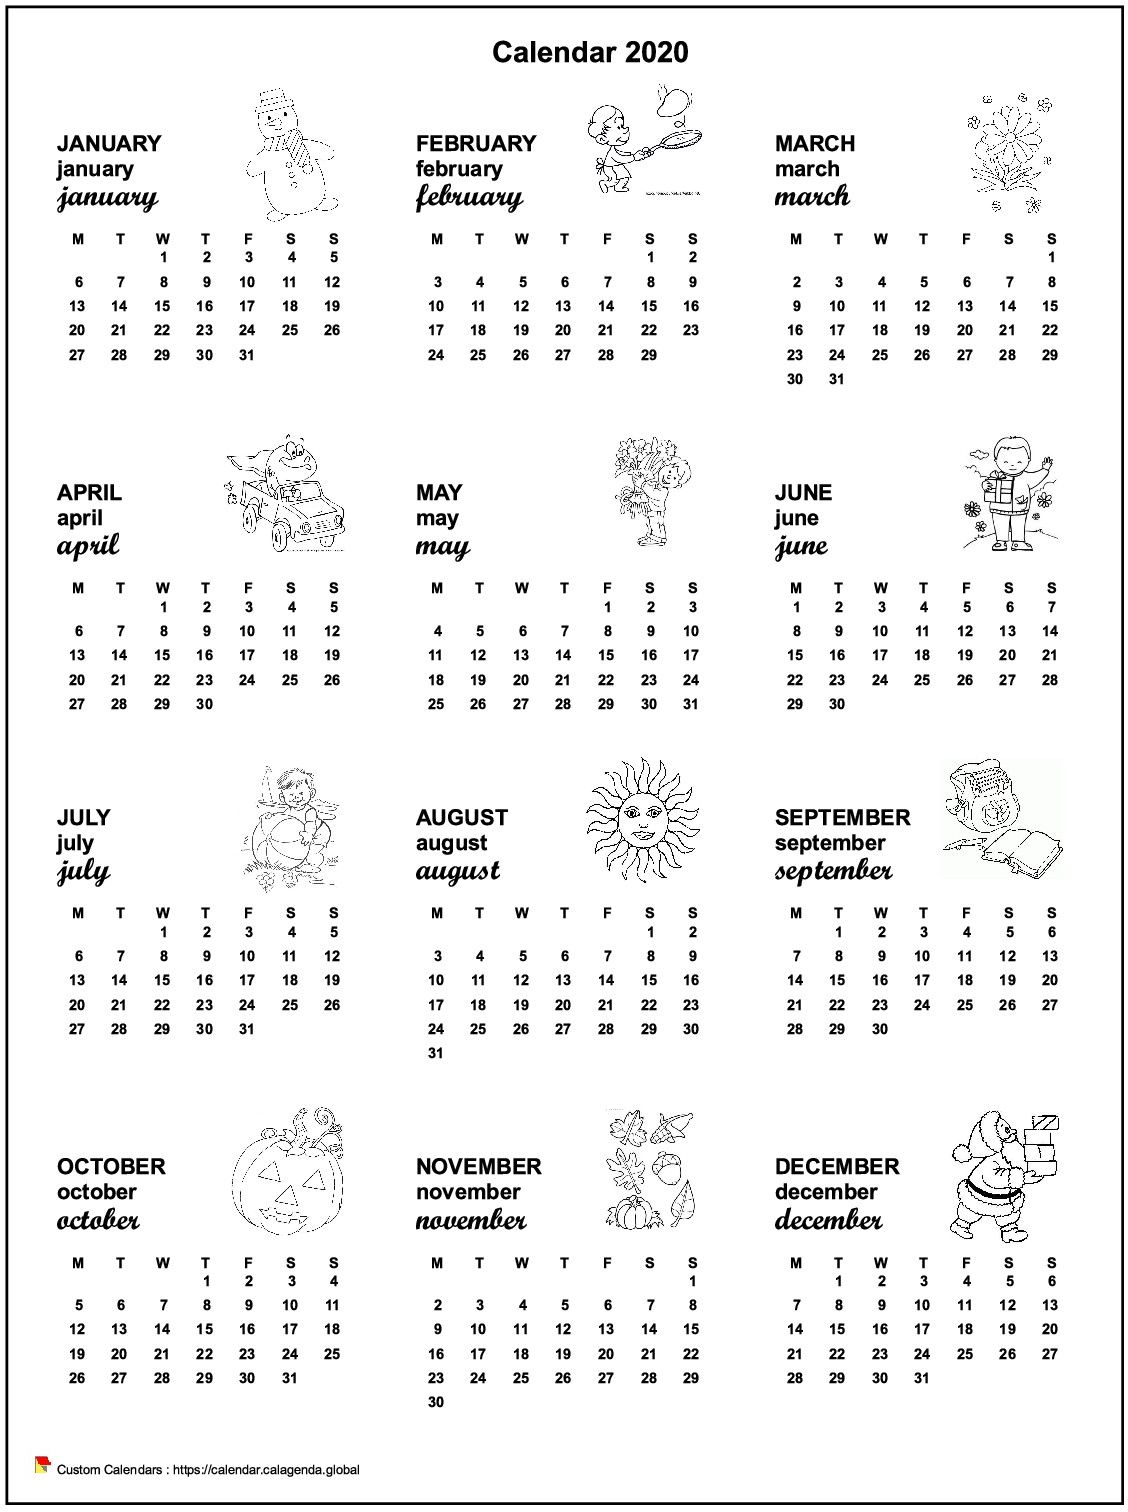 Calendar 2020 annual maternal and primary school